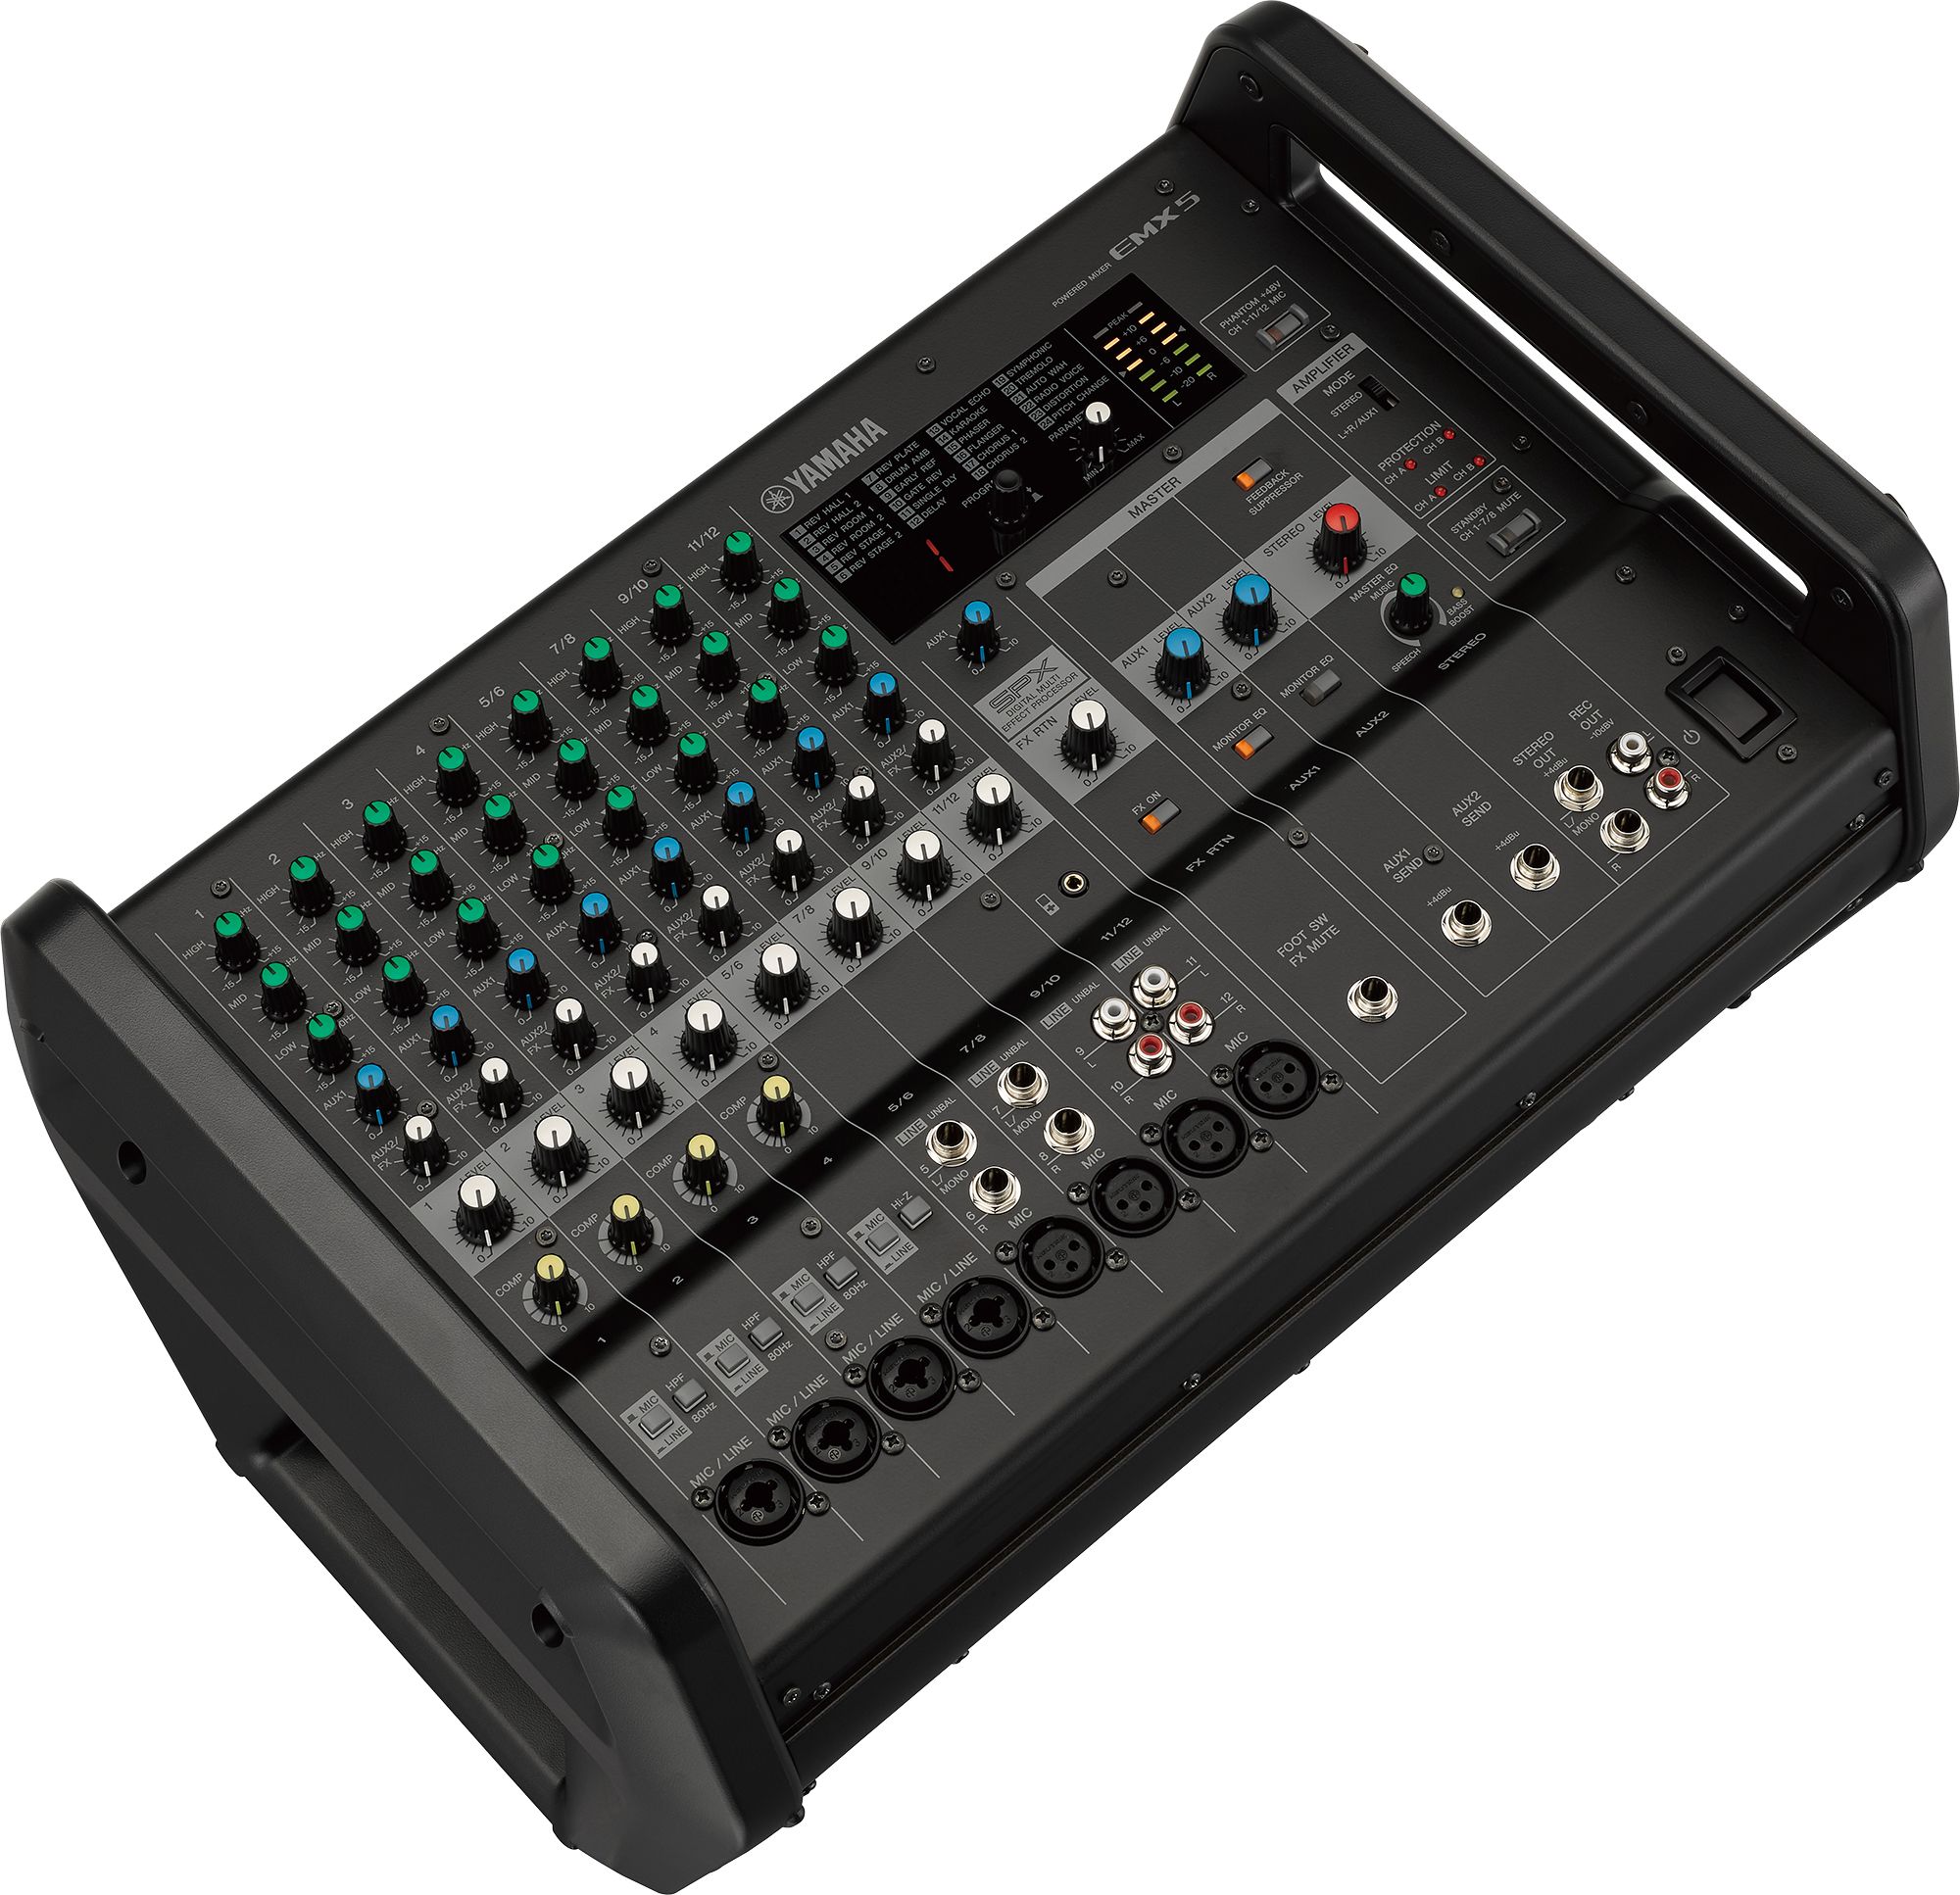 EMX7/EMX5 - Overview - Mixers - Professional Audio - Products 